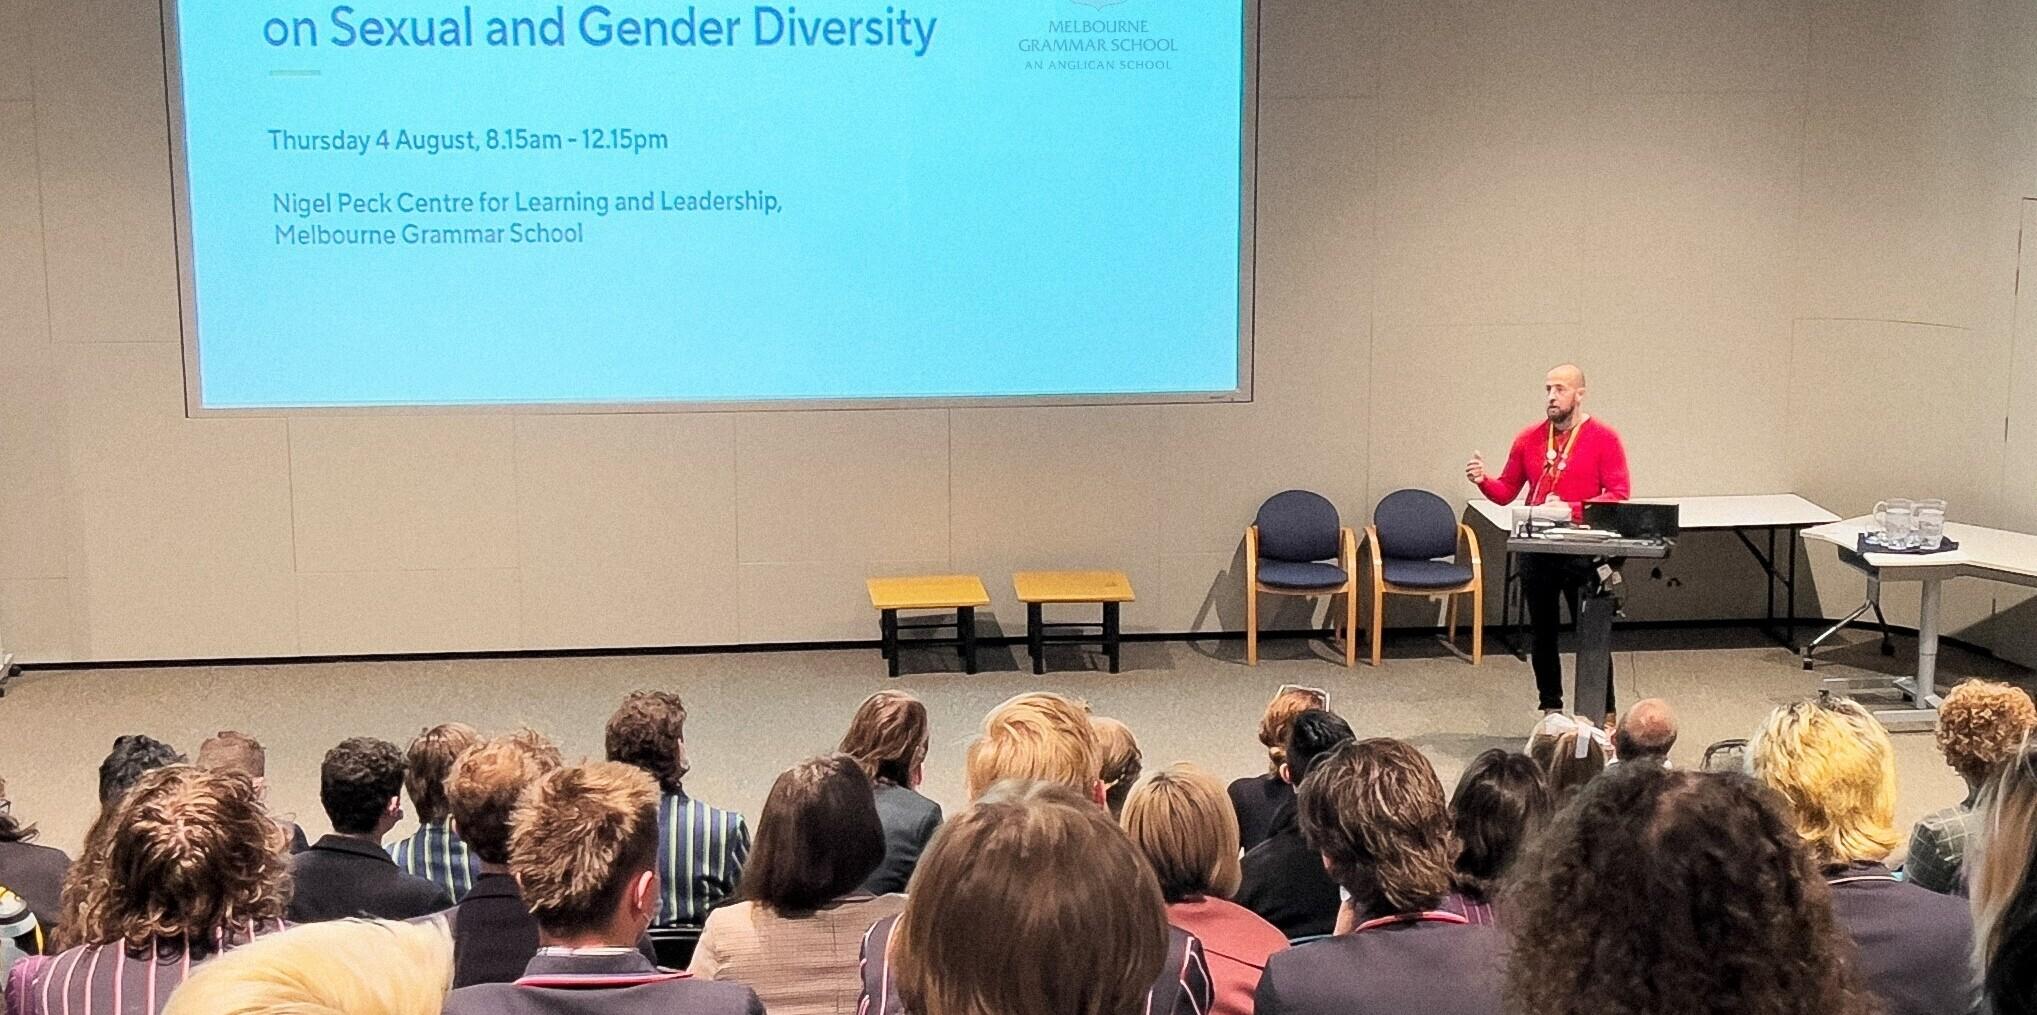 The 2023 Interschool Student Sexuality and Gender Leadership Conference